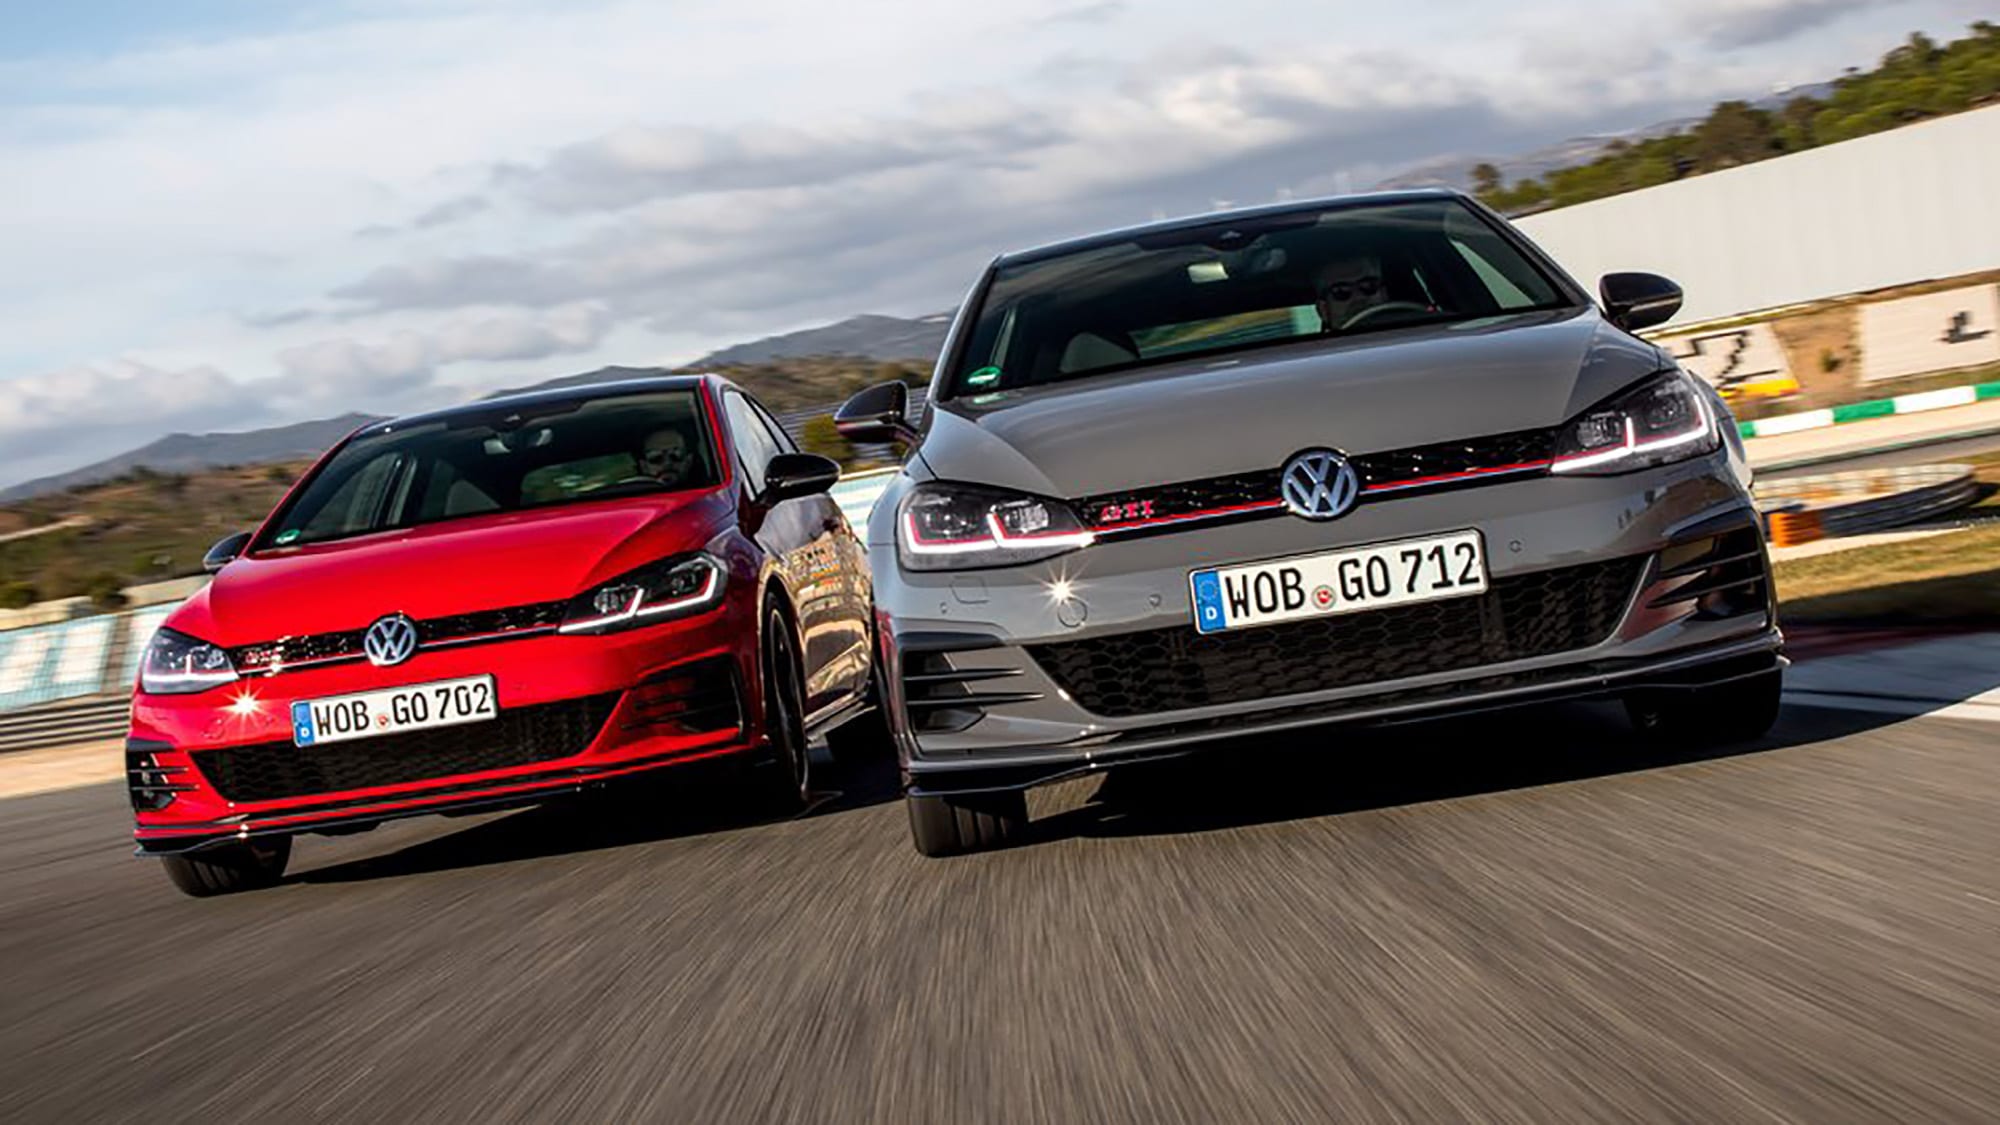 Volkswagen Golf Gti Tcr Here In October Caradvice